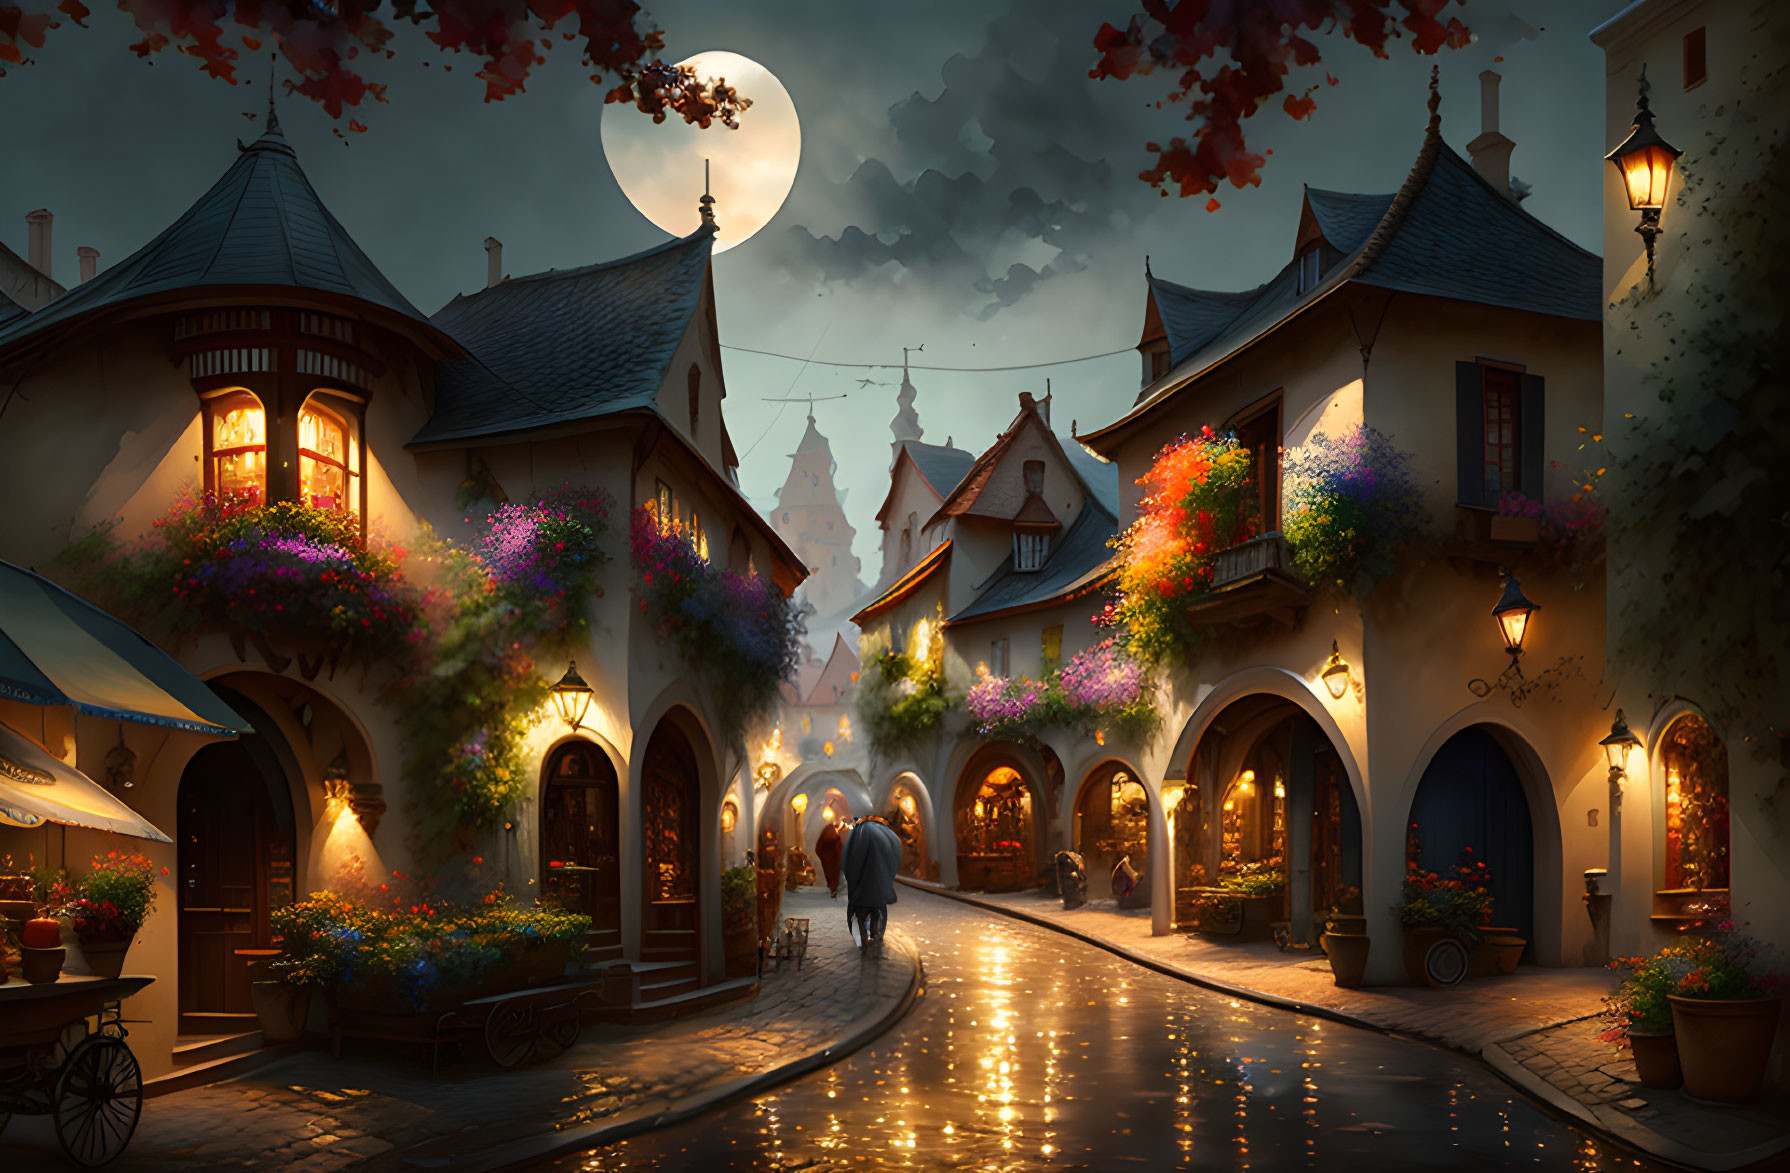 Moonlit cobblestone street in quaint village with traditional houses, colorful flowers, glowing lanterns,